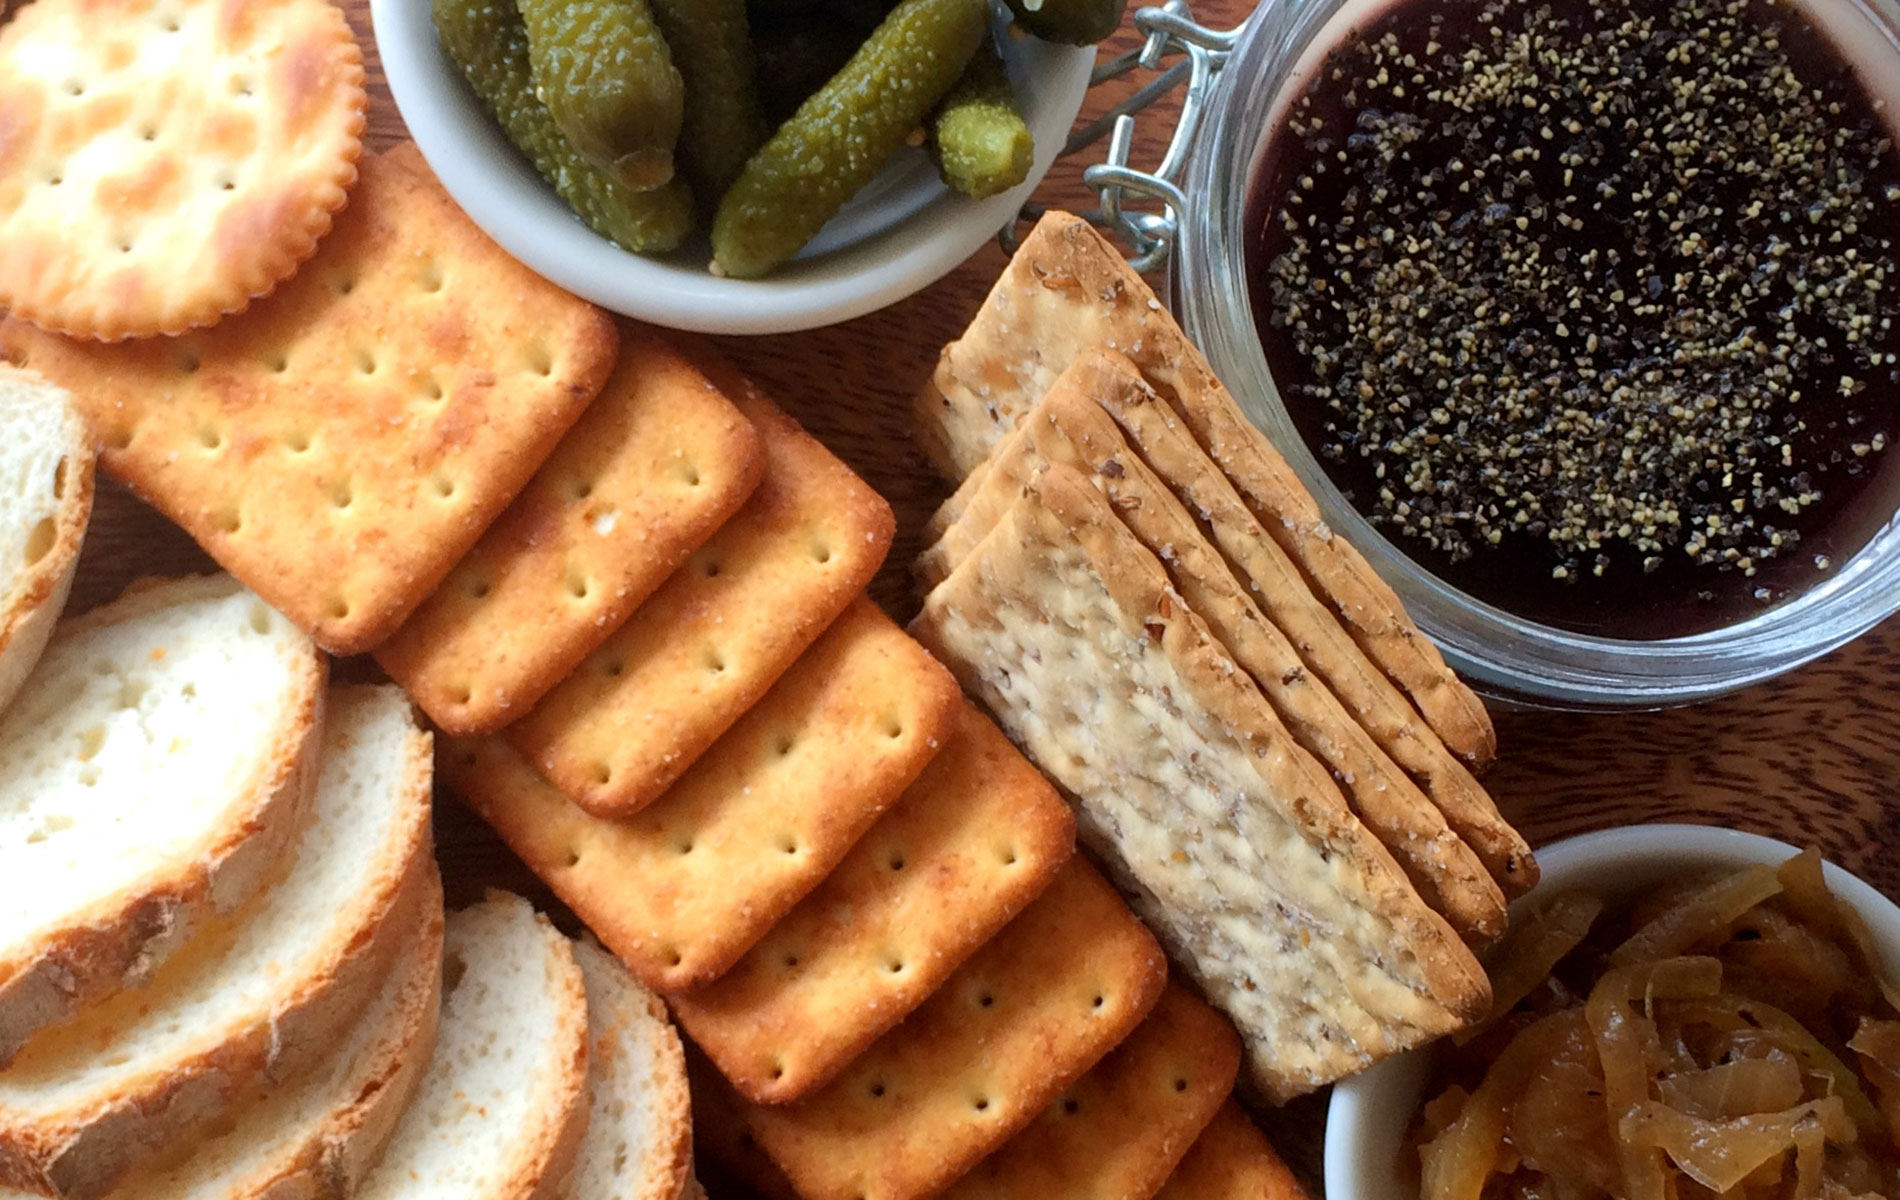 Cheese and cracker board